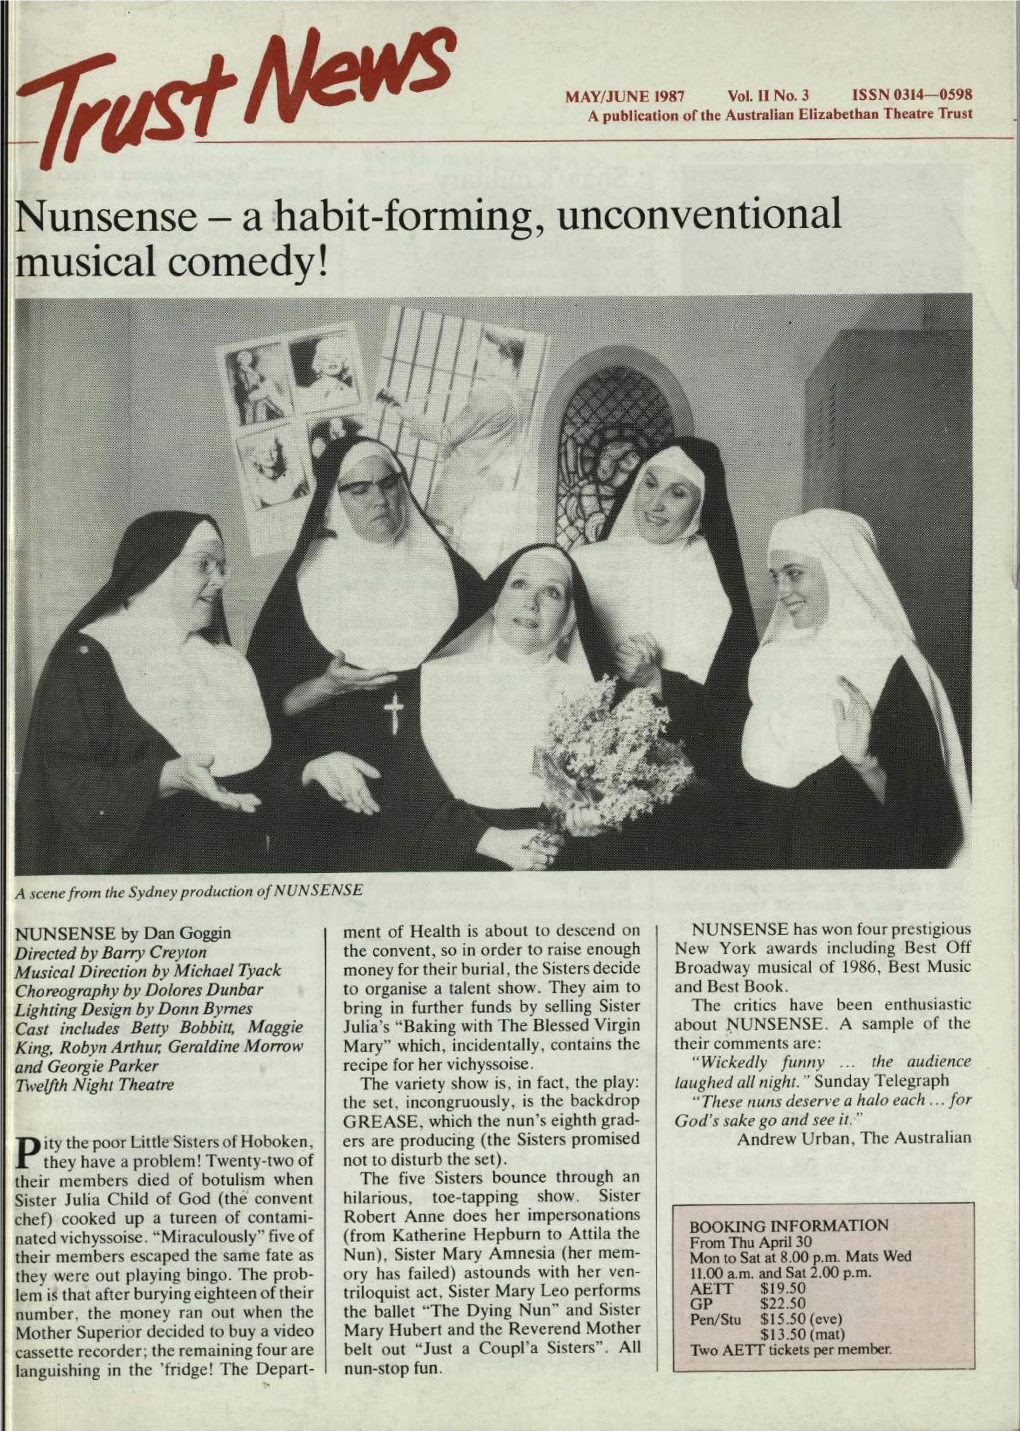 Nunsense - a Habit-Forming, Unconventional Musical Comedy!